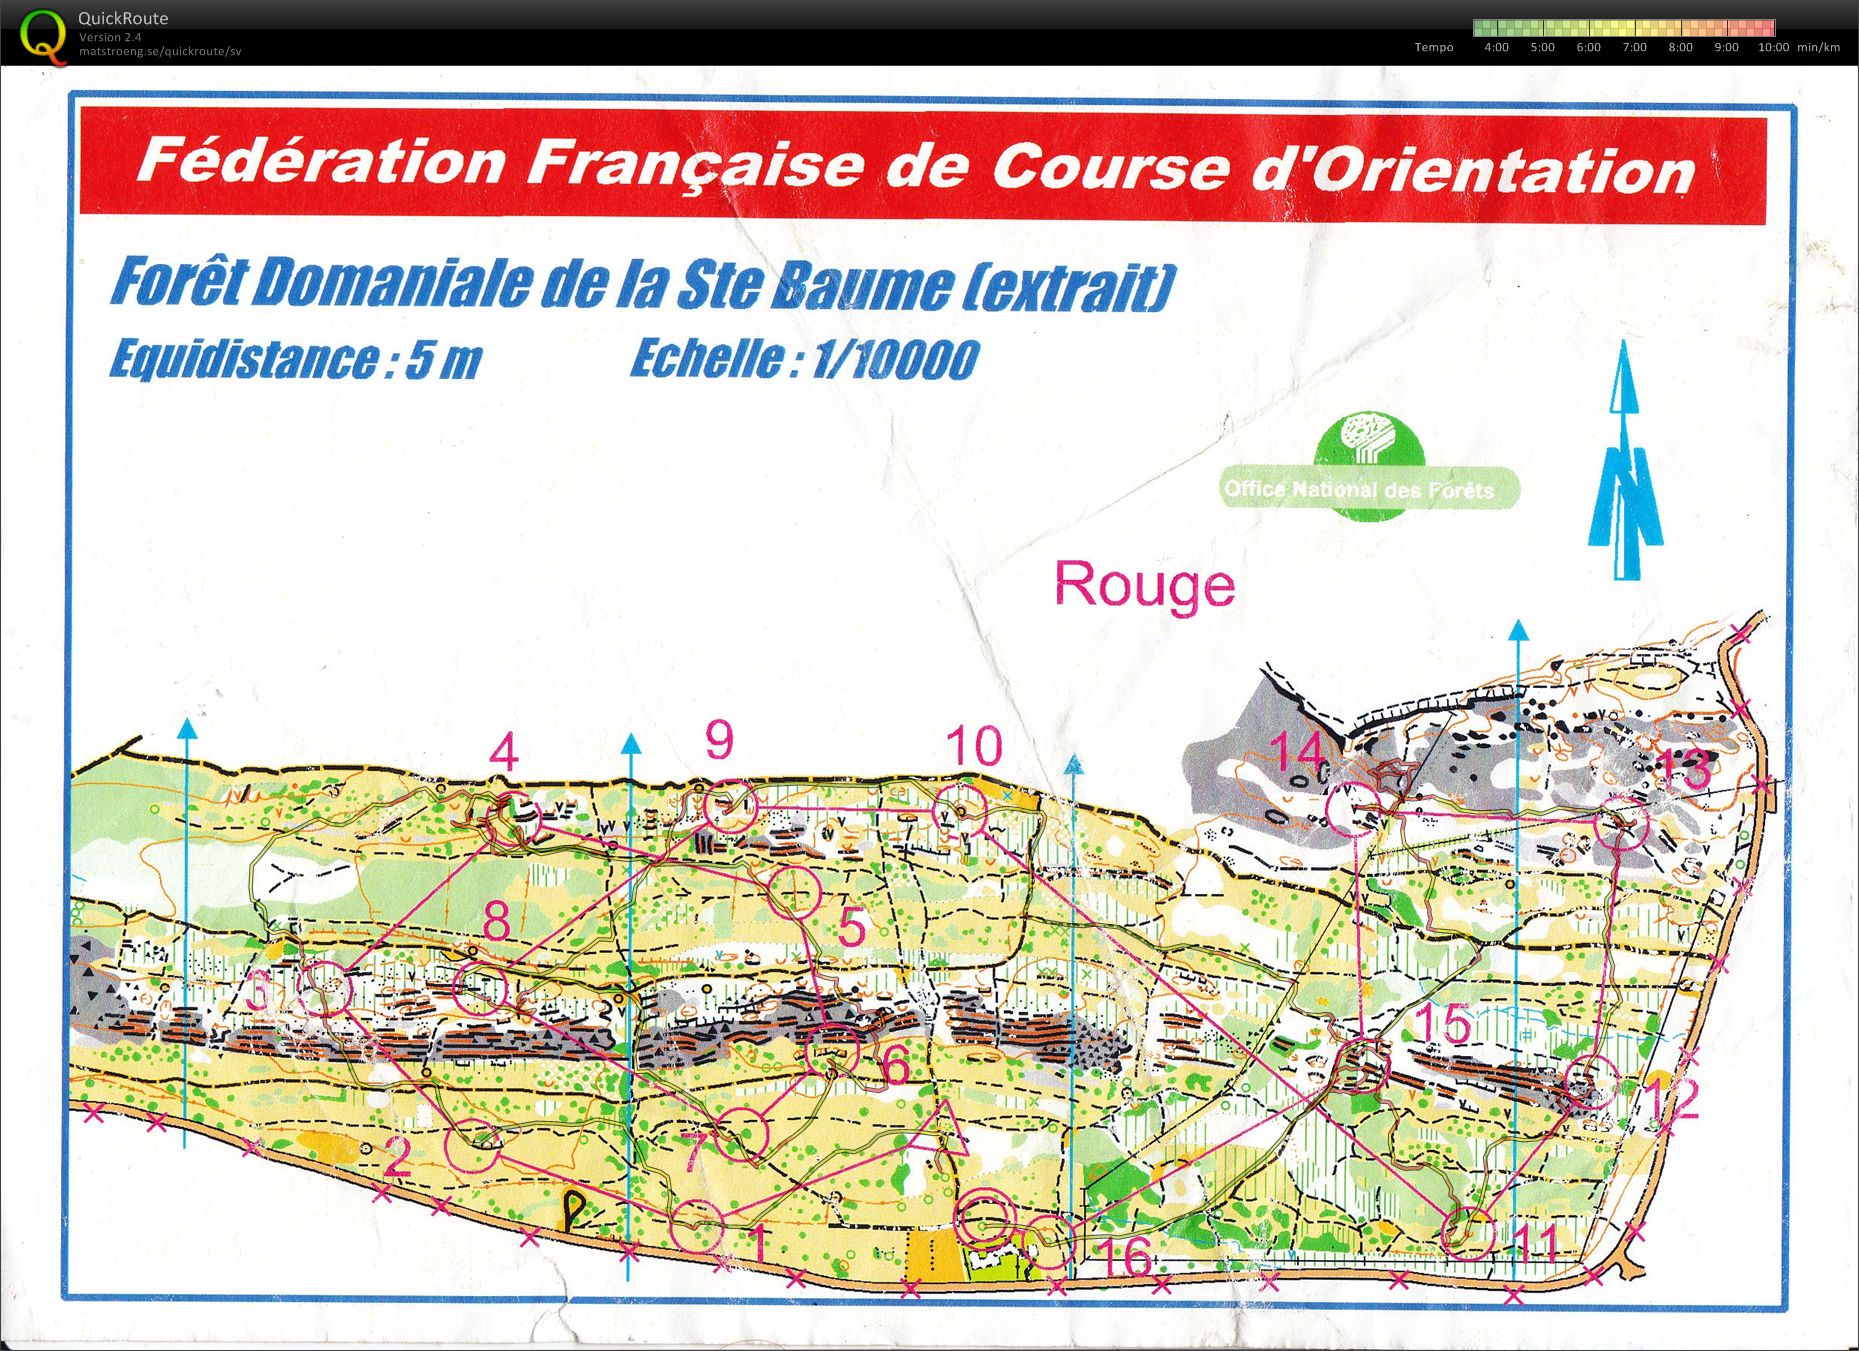 France Military preperation for Comp (2012-05-09)